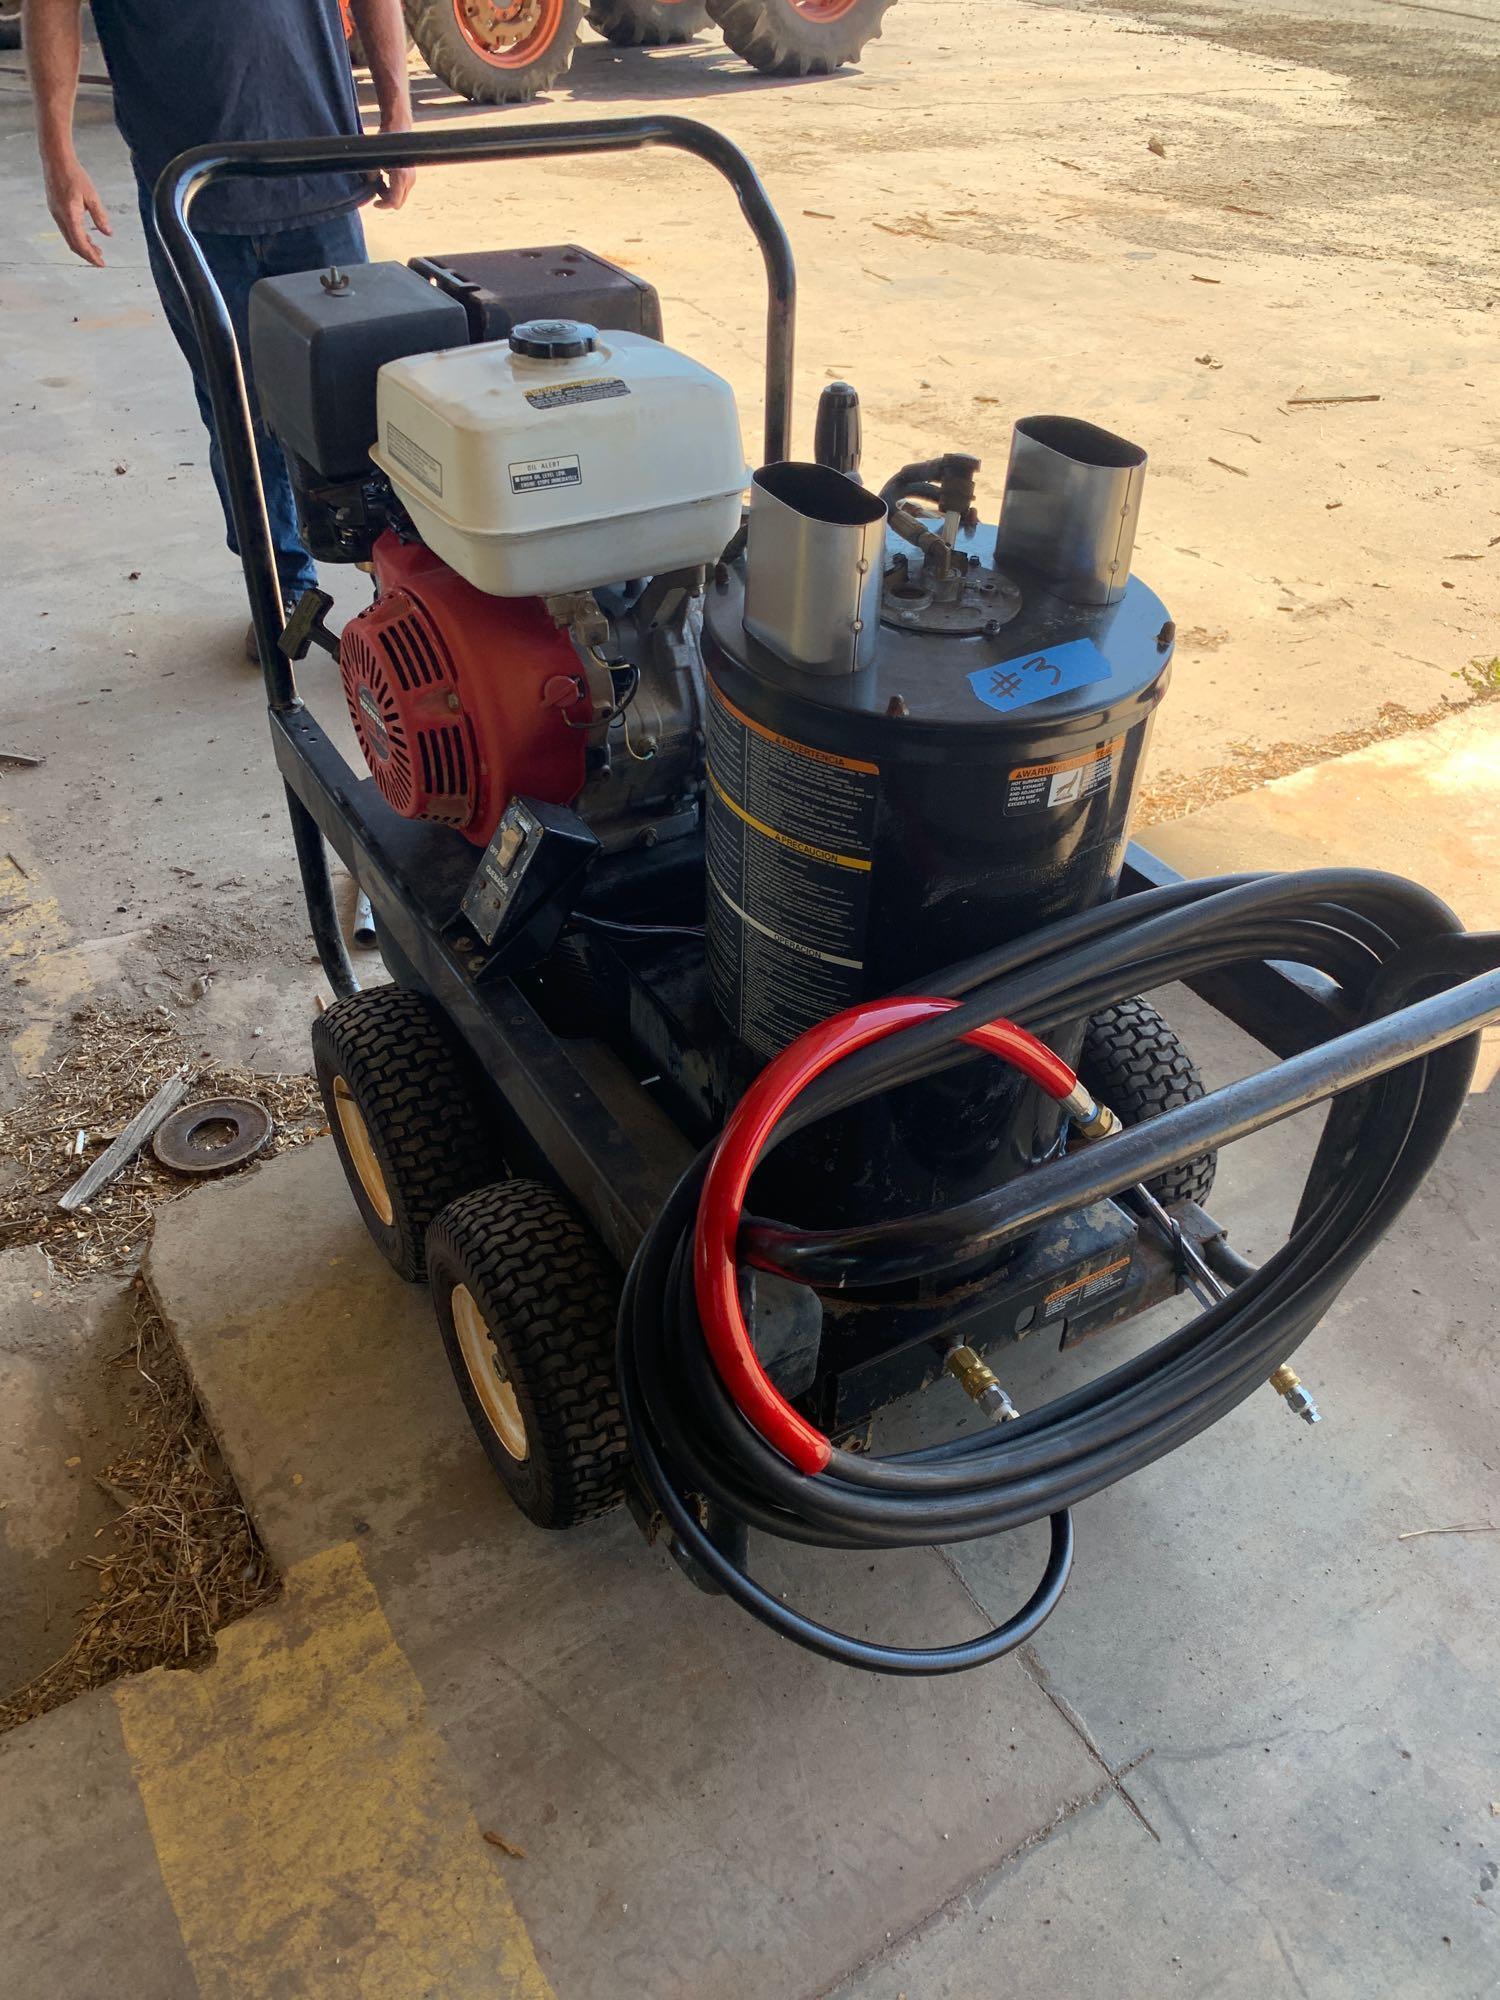 MI-T-M (RECONDITIONED) 3.5 GPM, 3000 PSI, 13HP Oil Fired Hot Water Pressure Washer